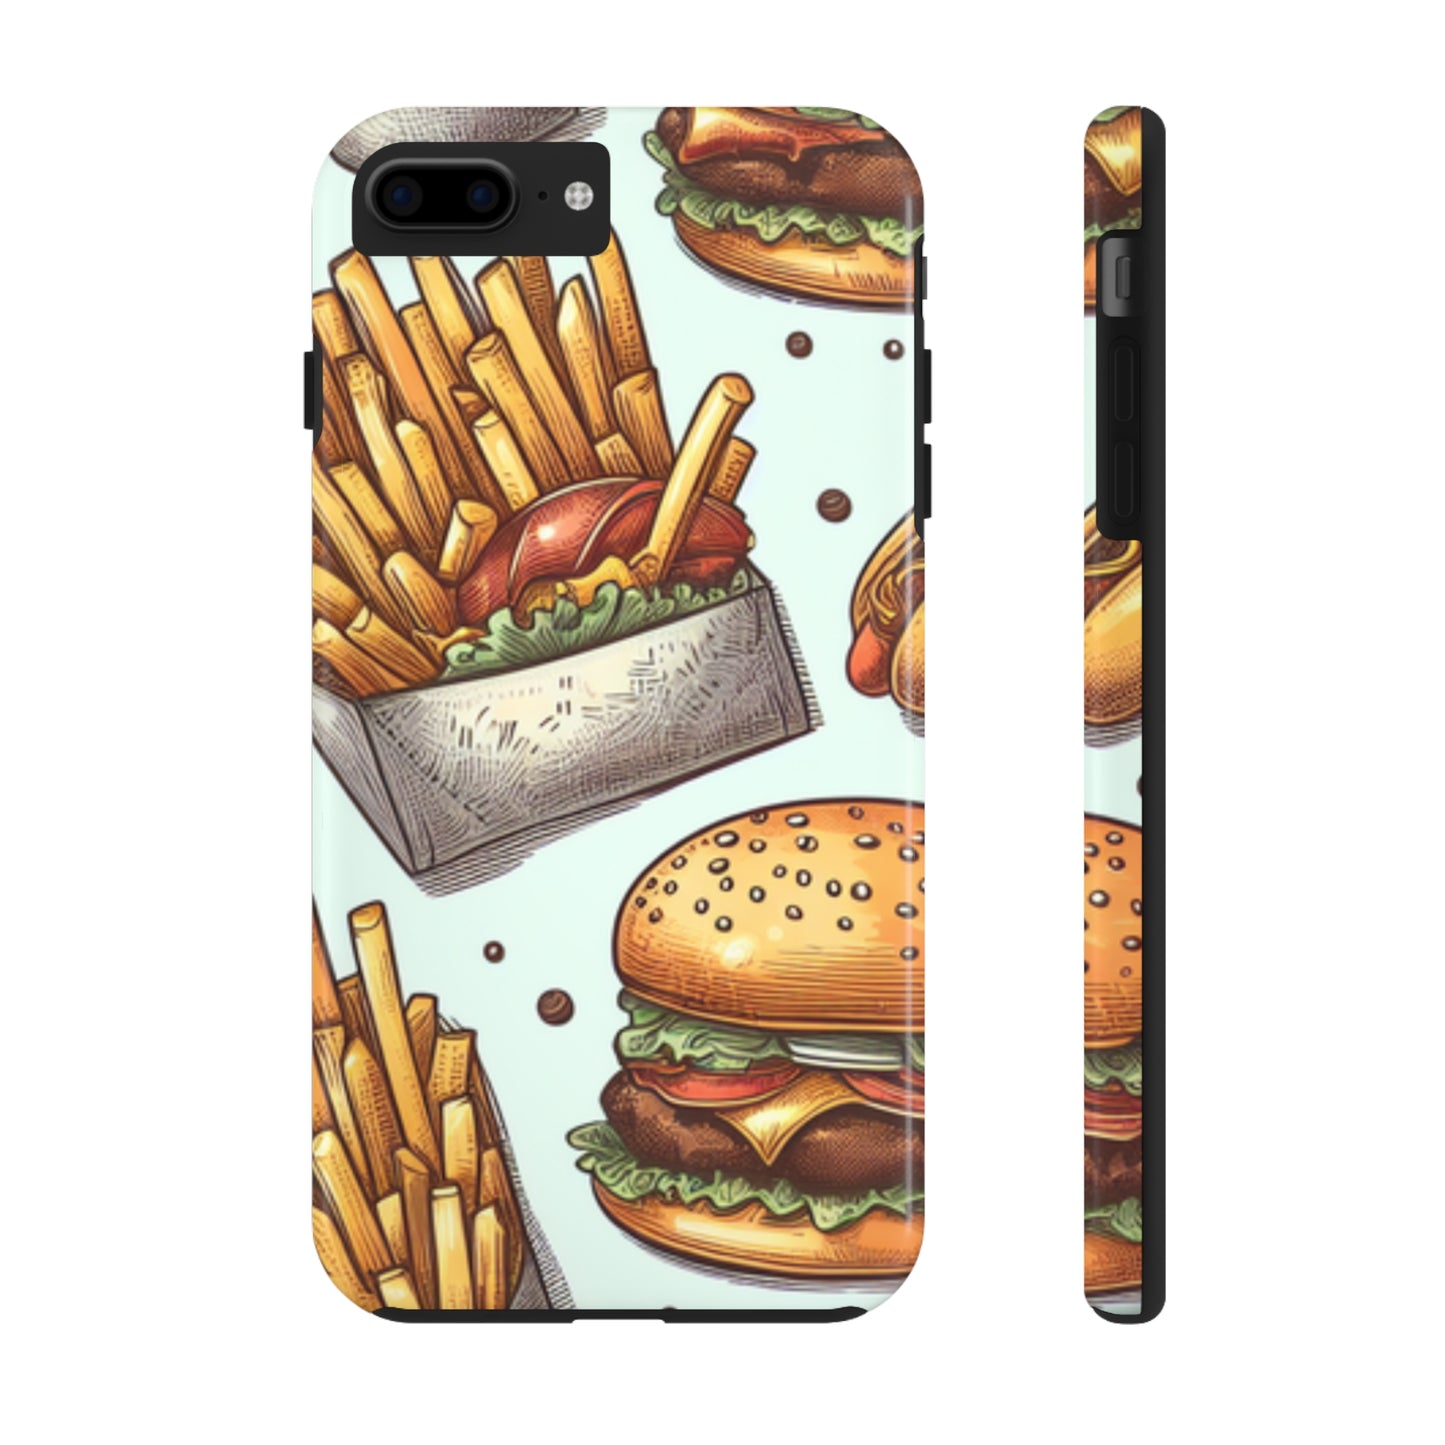 Burger and fries phone case